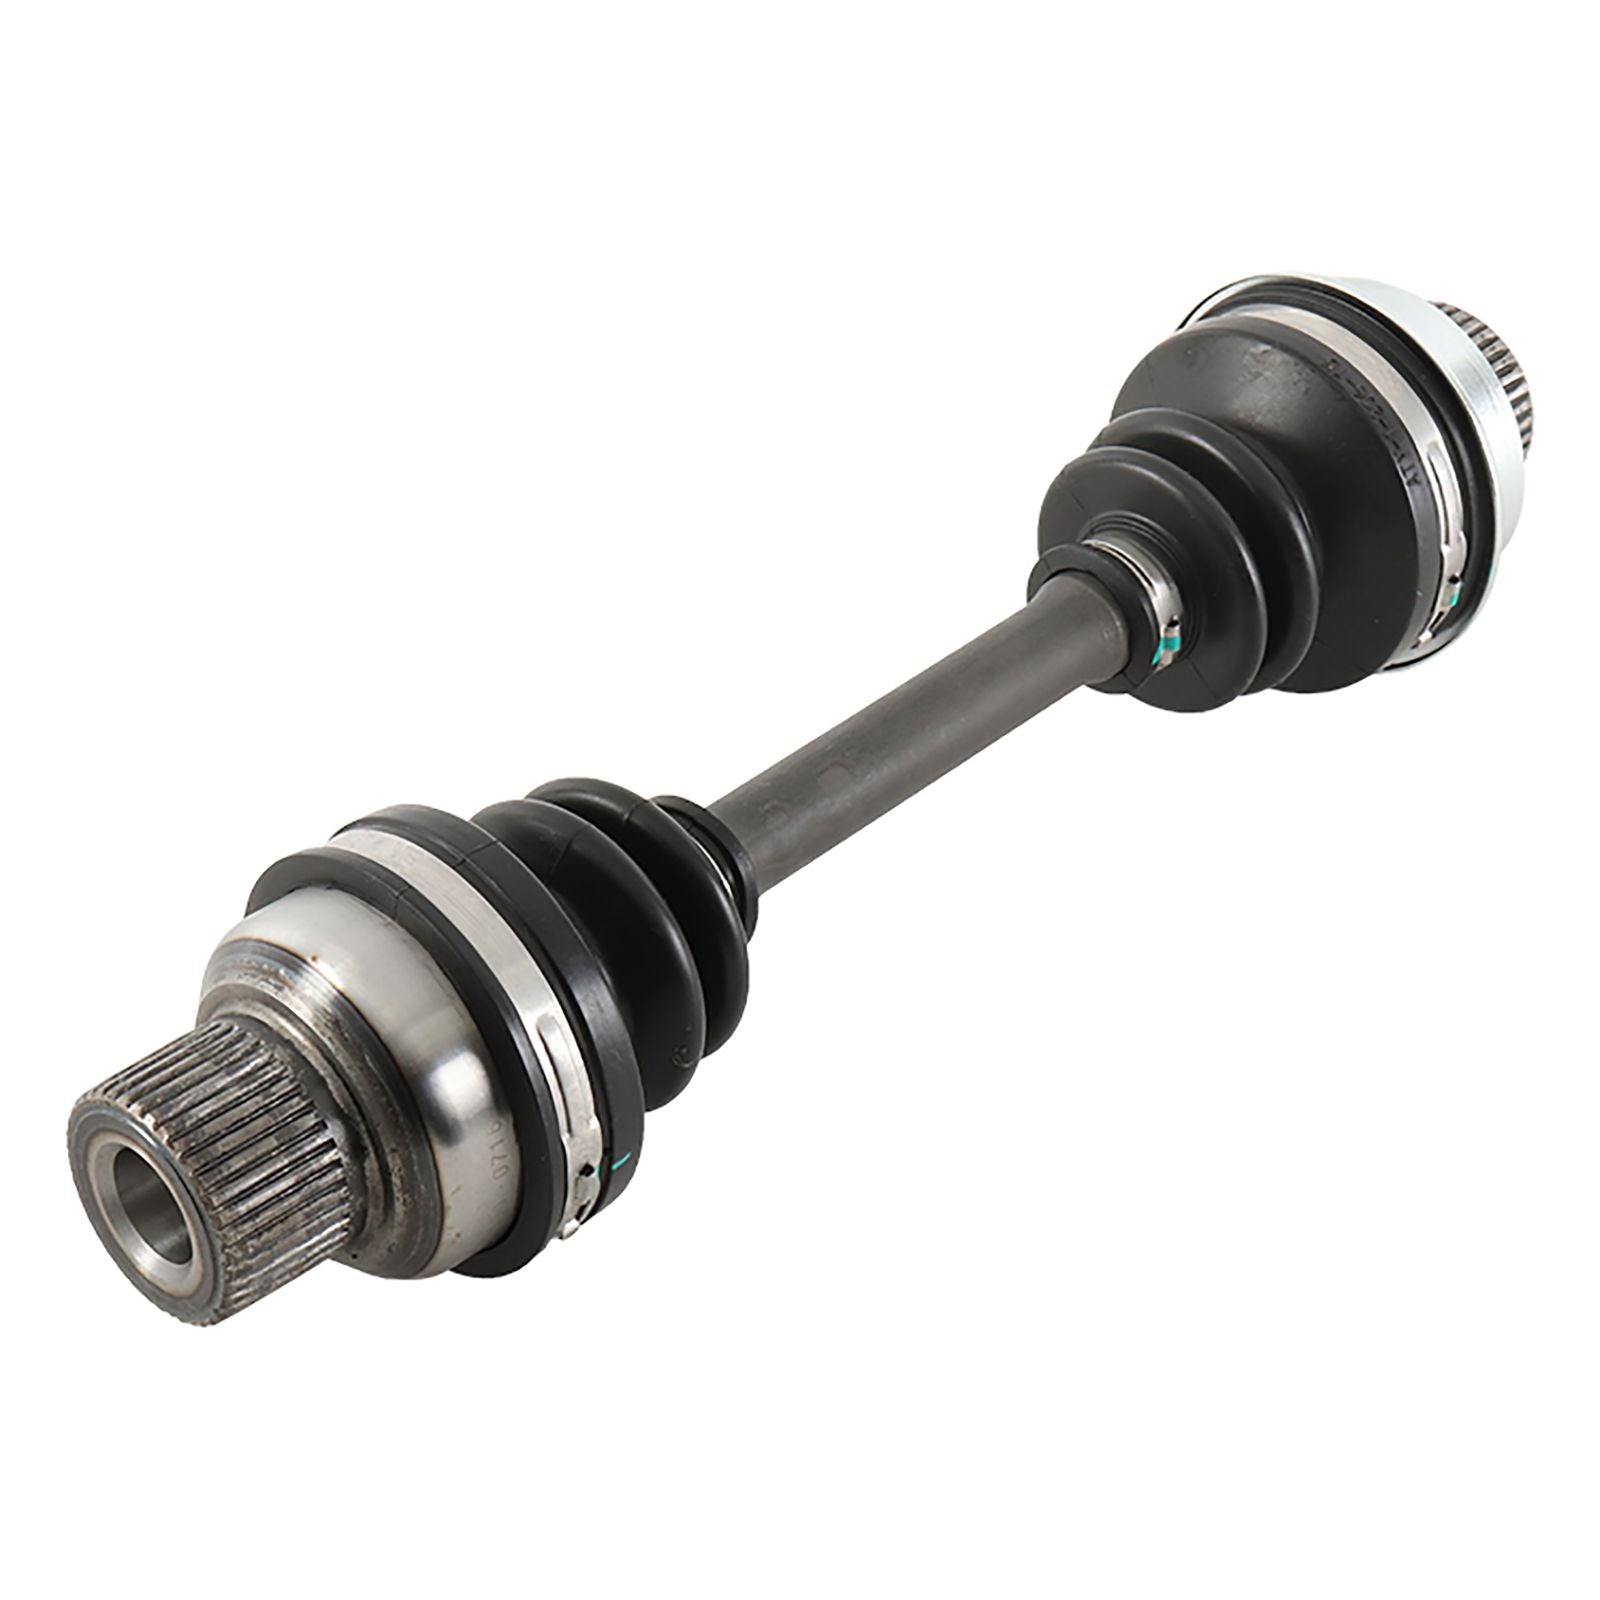 New ALL BALLS Racing ATV Driveshaft - Front (ENG TO DIFF ) #AB6YA9300